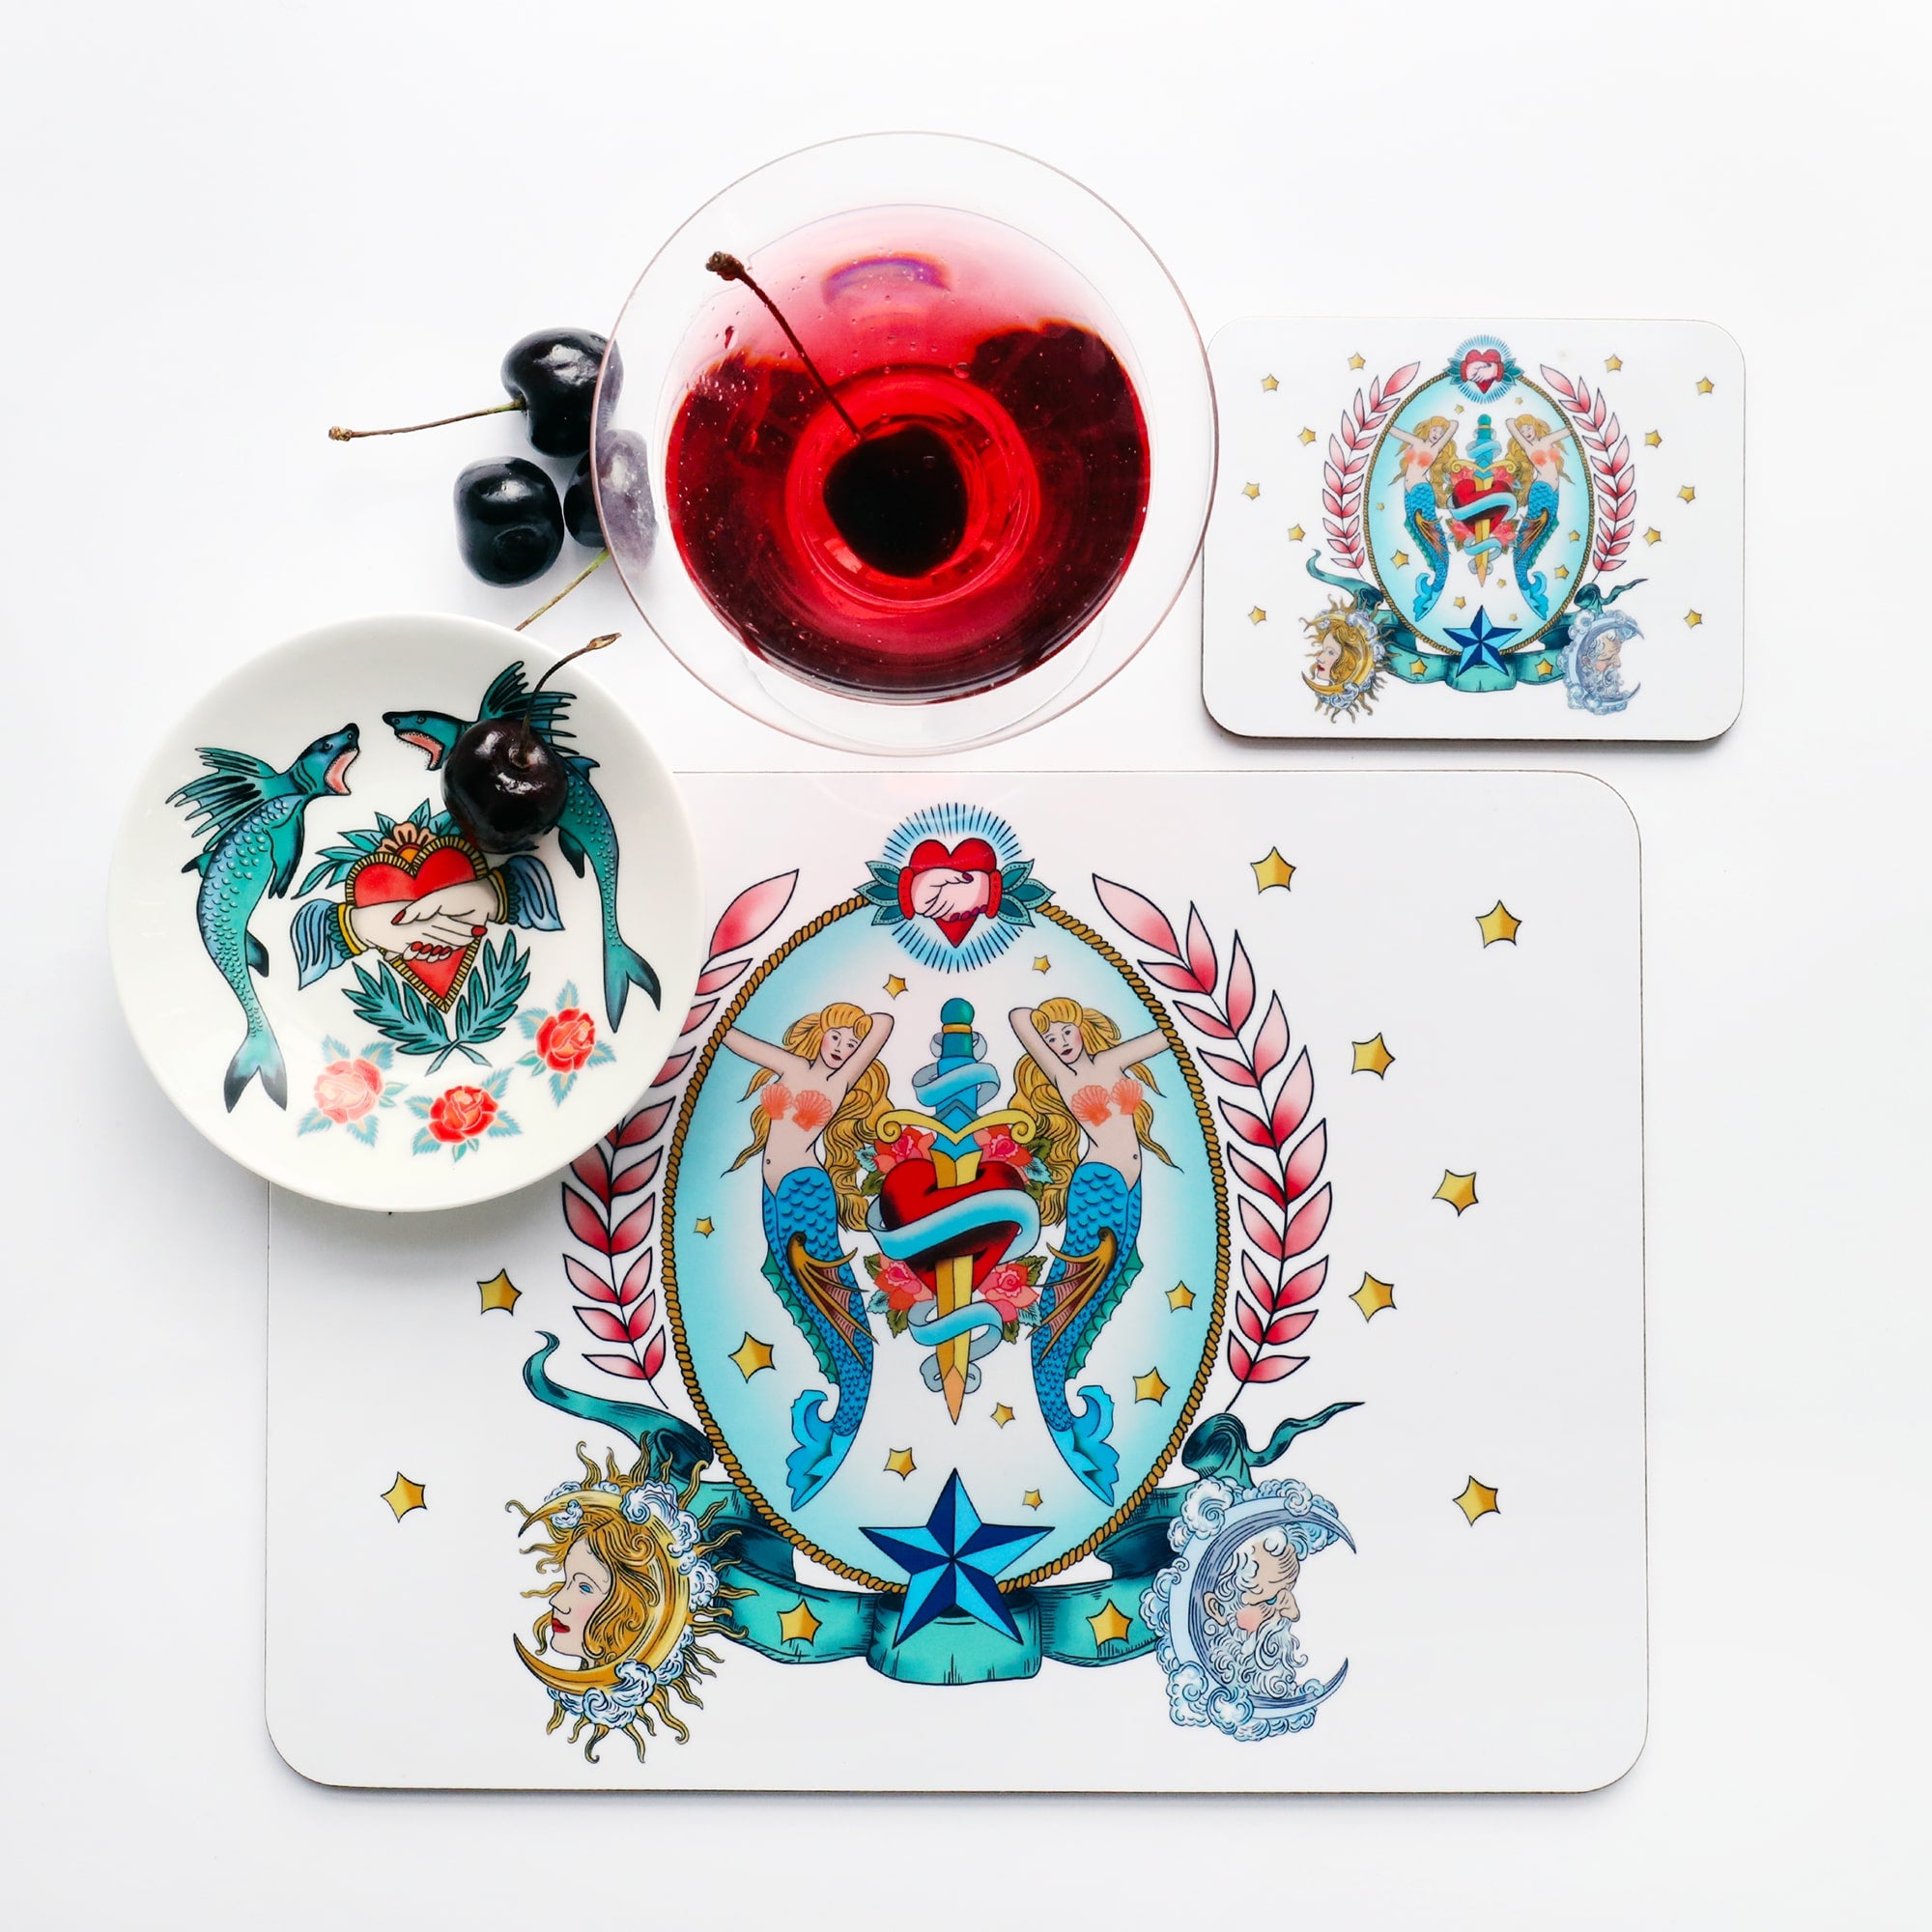 Place setting with placemat, coaster and nibbles dish all the the same mermaid, heart and dagger design that is inspired by a sailors tattoos. The place setting is shot from above and there is a red cocktail and cherries just above the placemat.